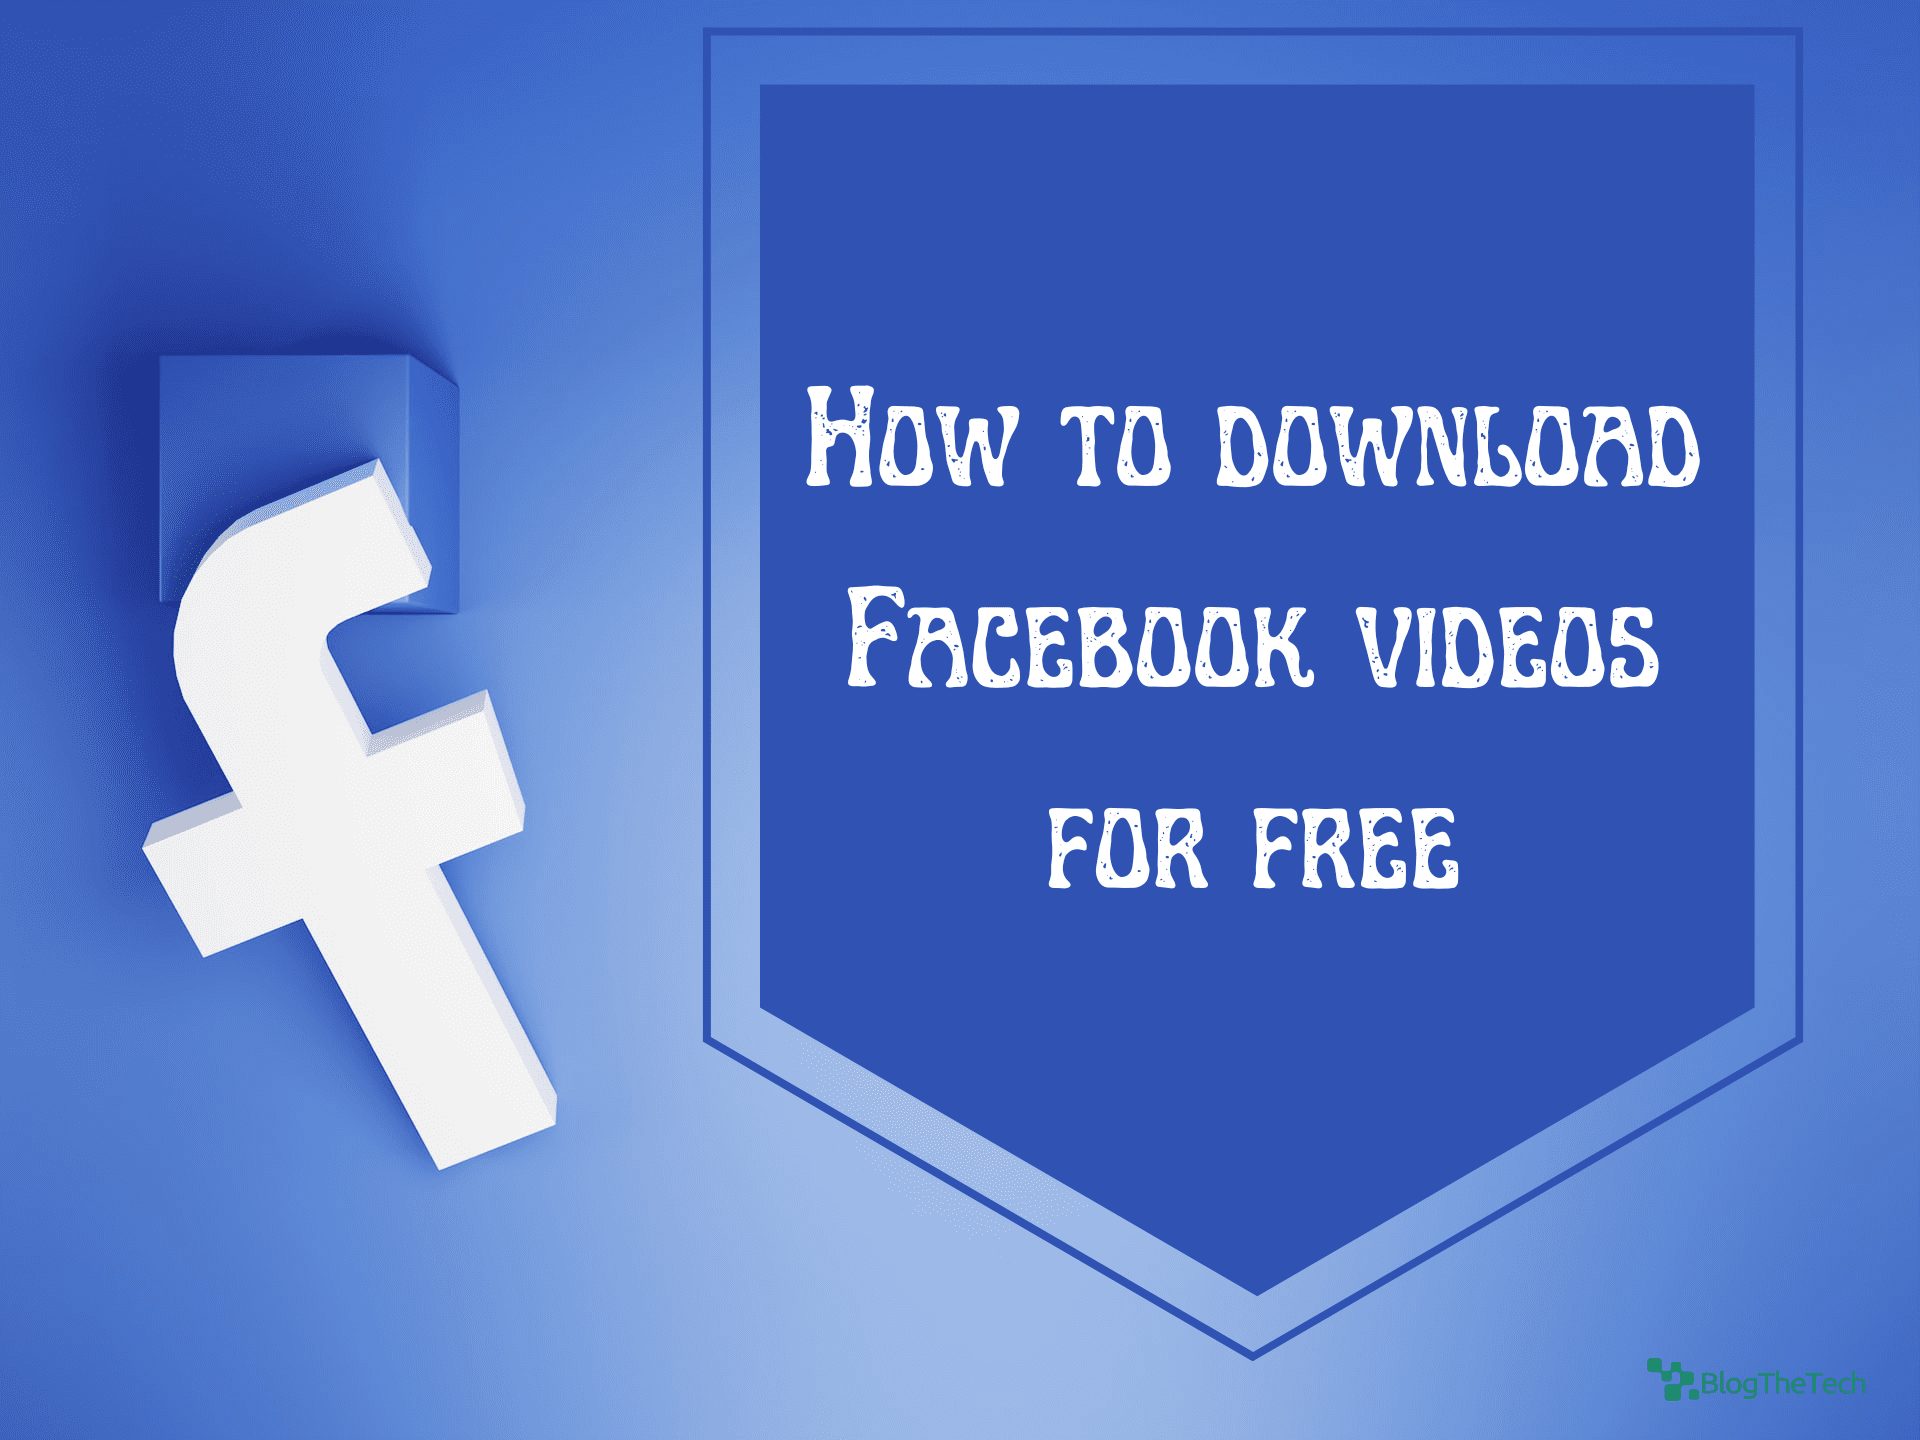 How to download Facebook videos for free